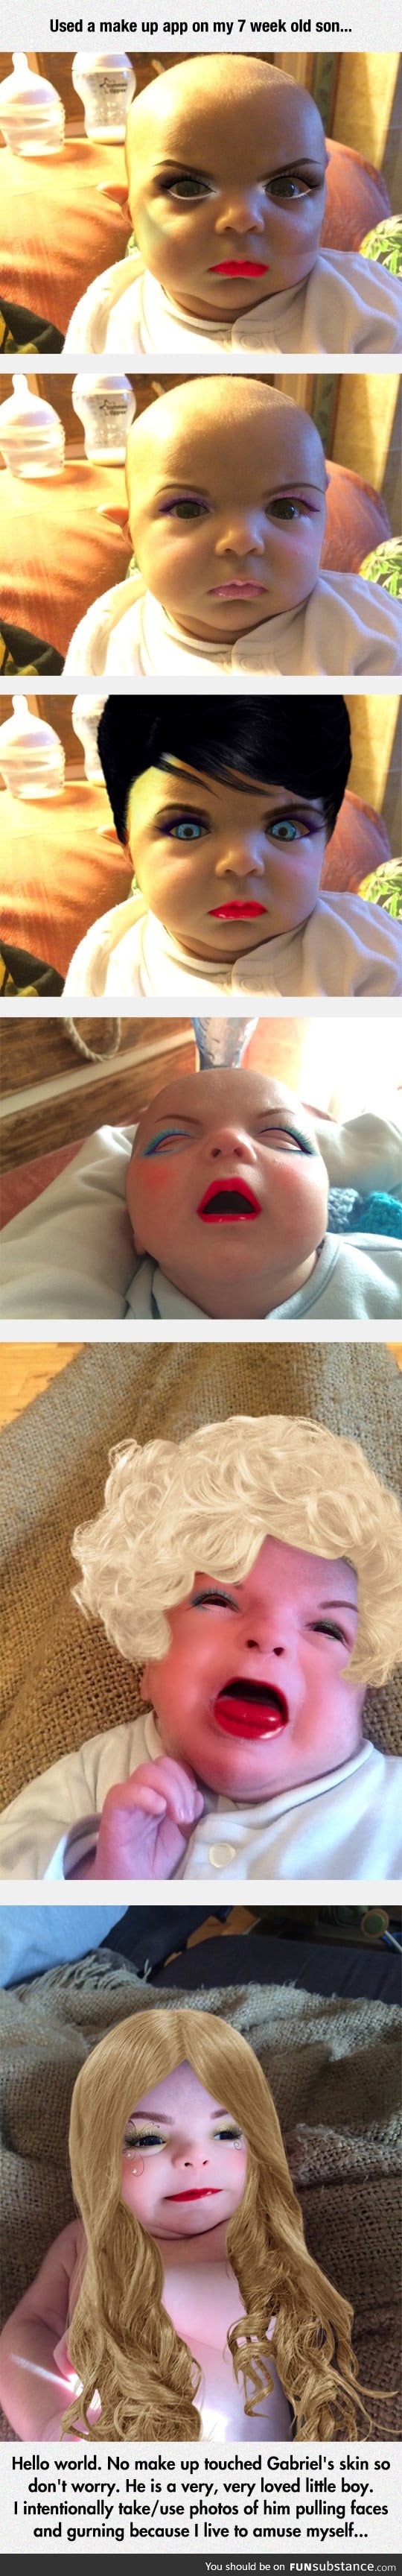 What happens you use a makeup app on a baby